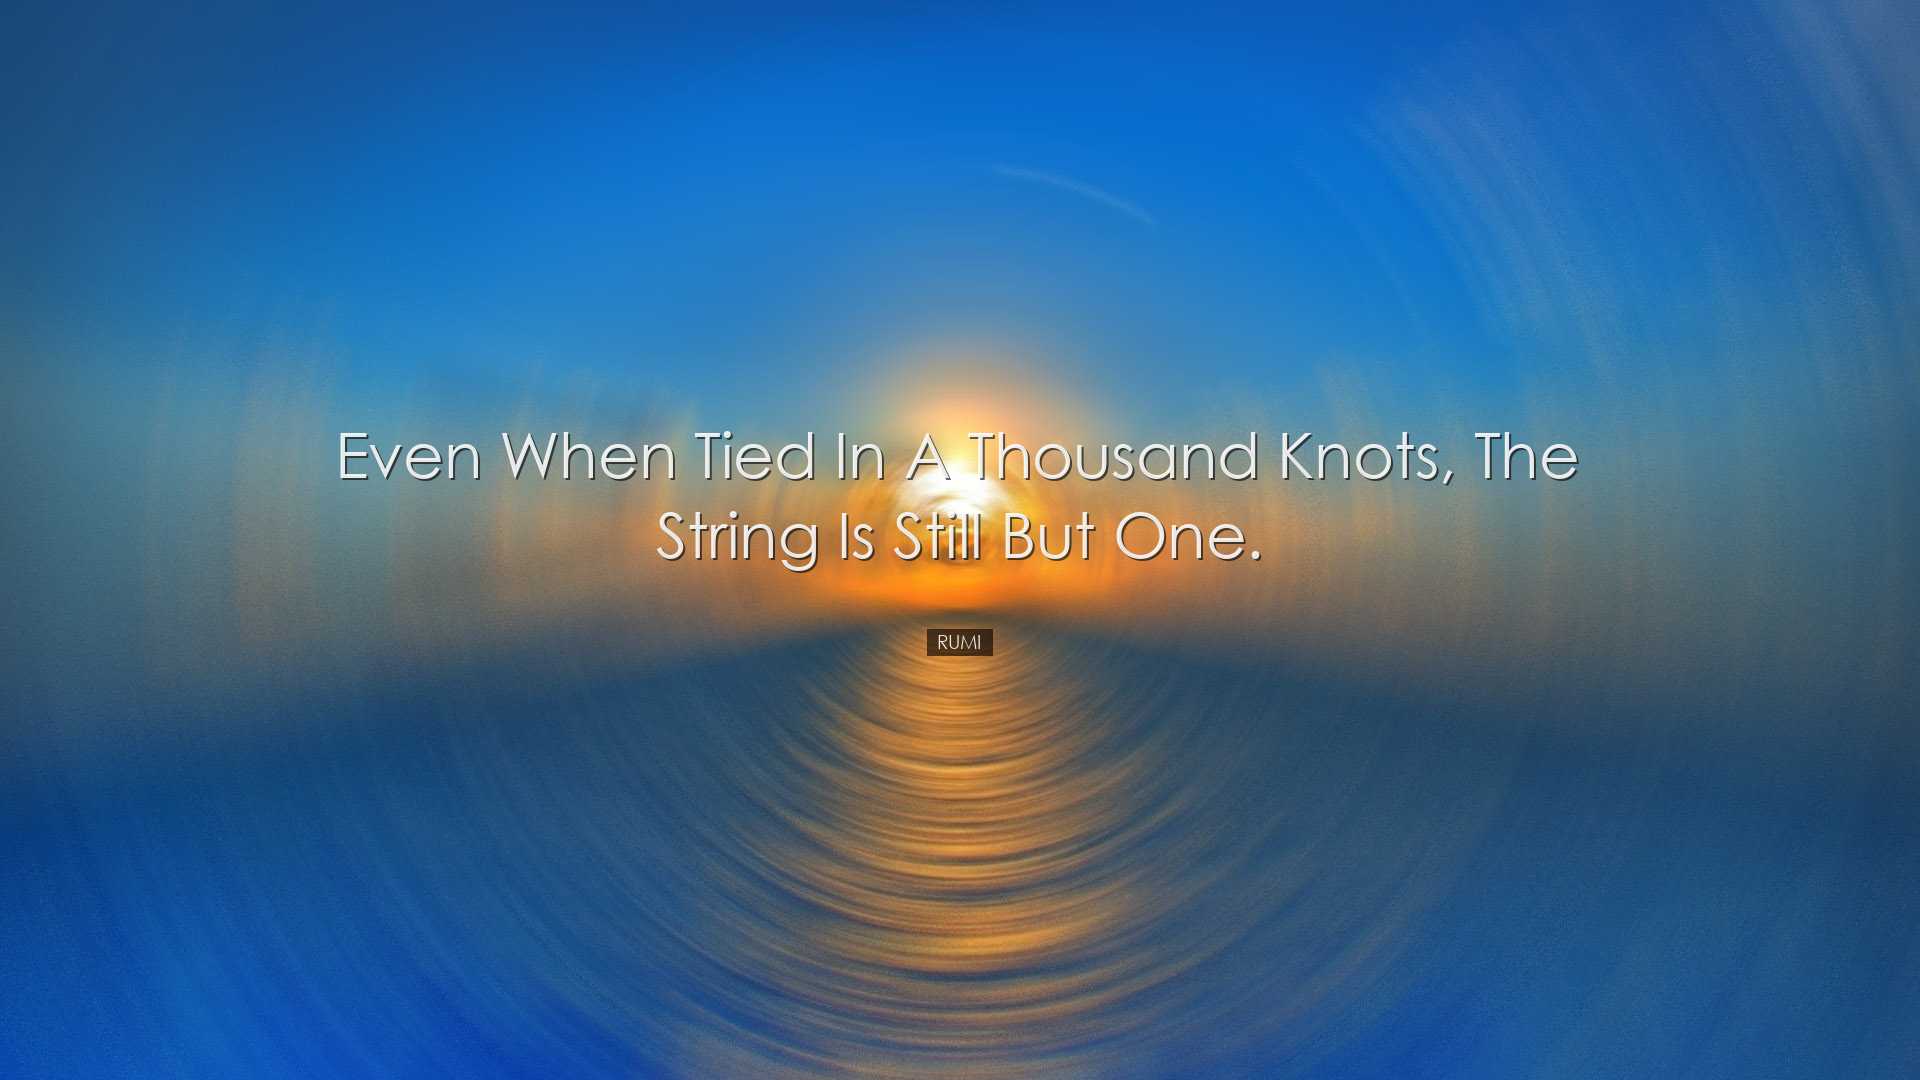 Even when tied in a thousand knots, the string is still but one. -